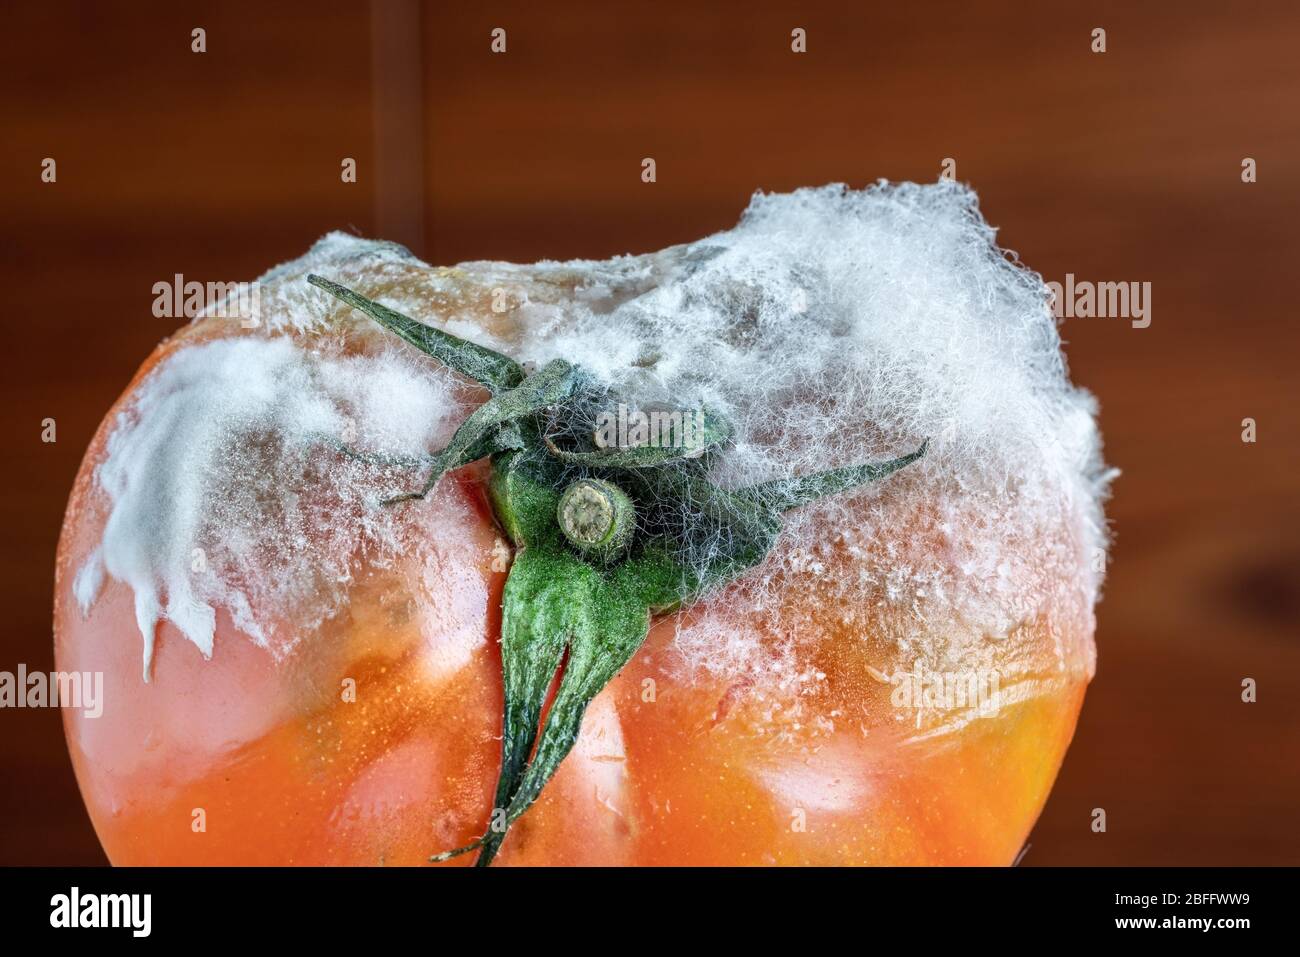 Rotten tomato with mold and fungi closeup on a dark background. Stock Photo